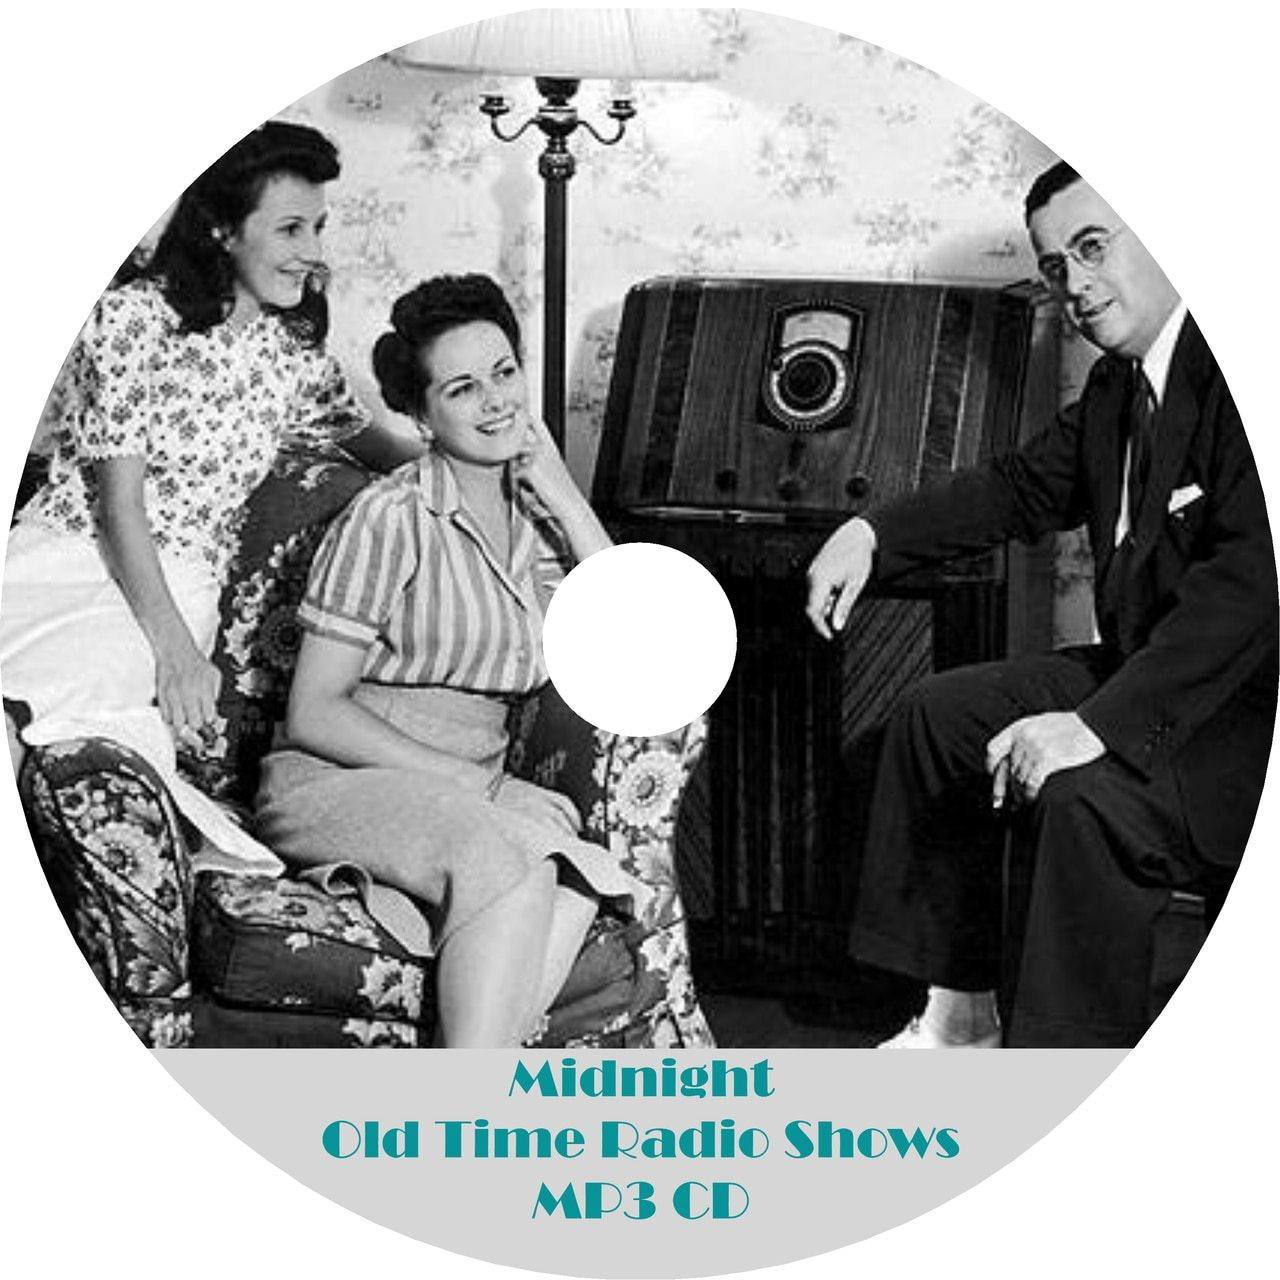 Midnight Old Time Radio Shows 13 Episodes On MP3 CD - OTR World